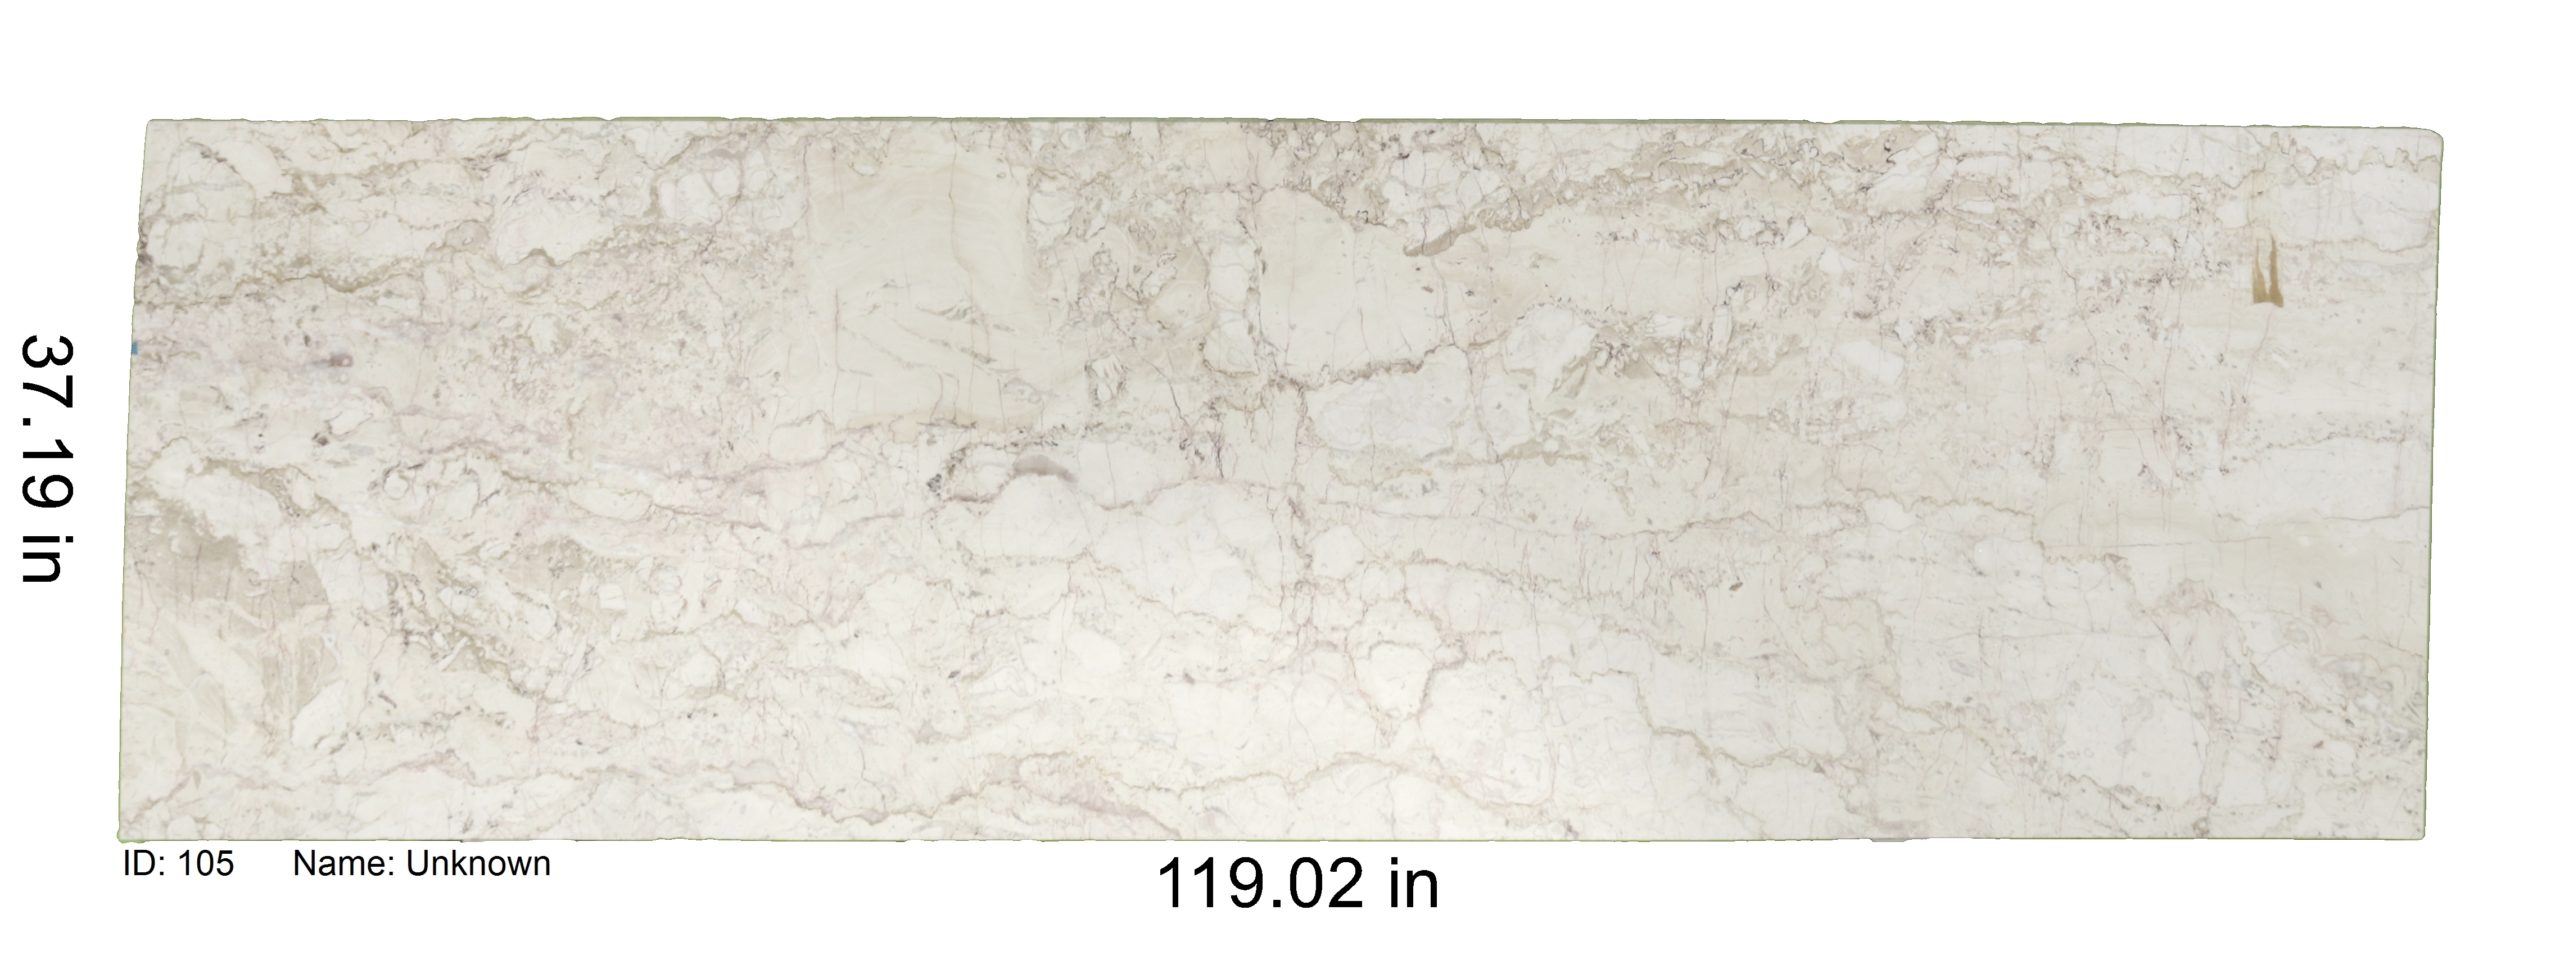 Ivory Marble With Grey And Brown Veining<br />
ID: 105<br />
Name: Unknown<br />
Size 37.19x119.02